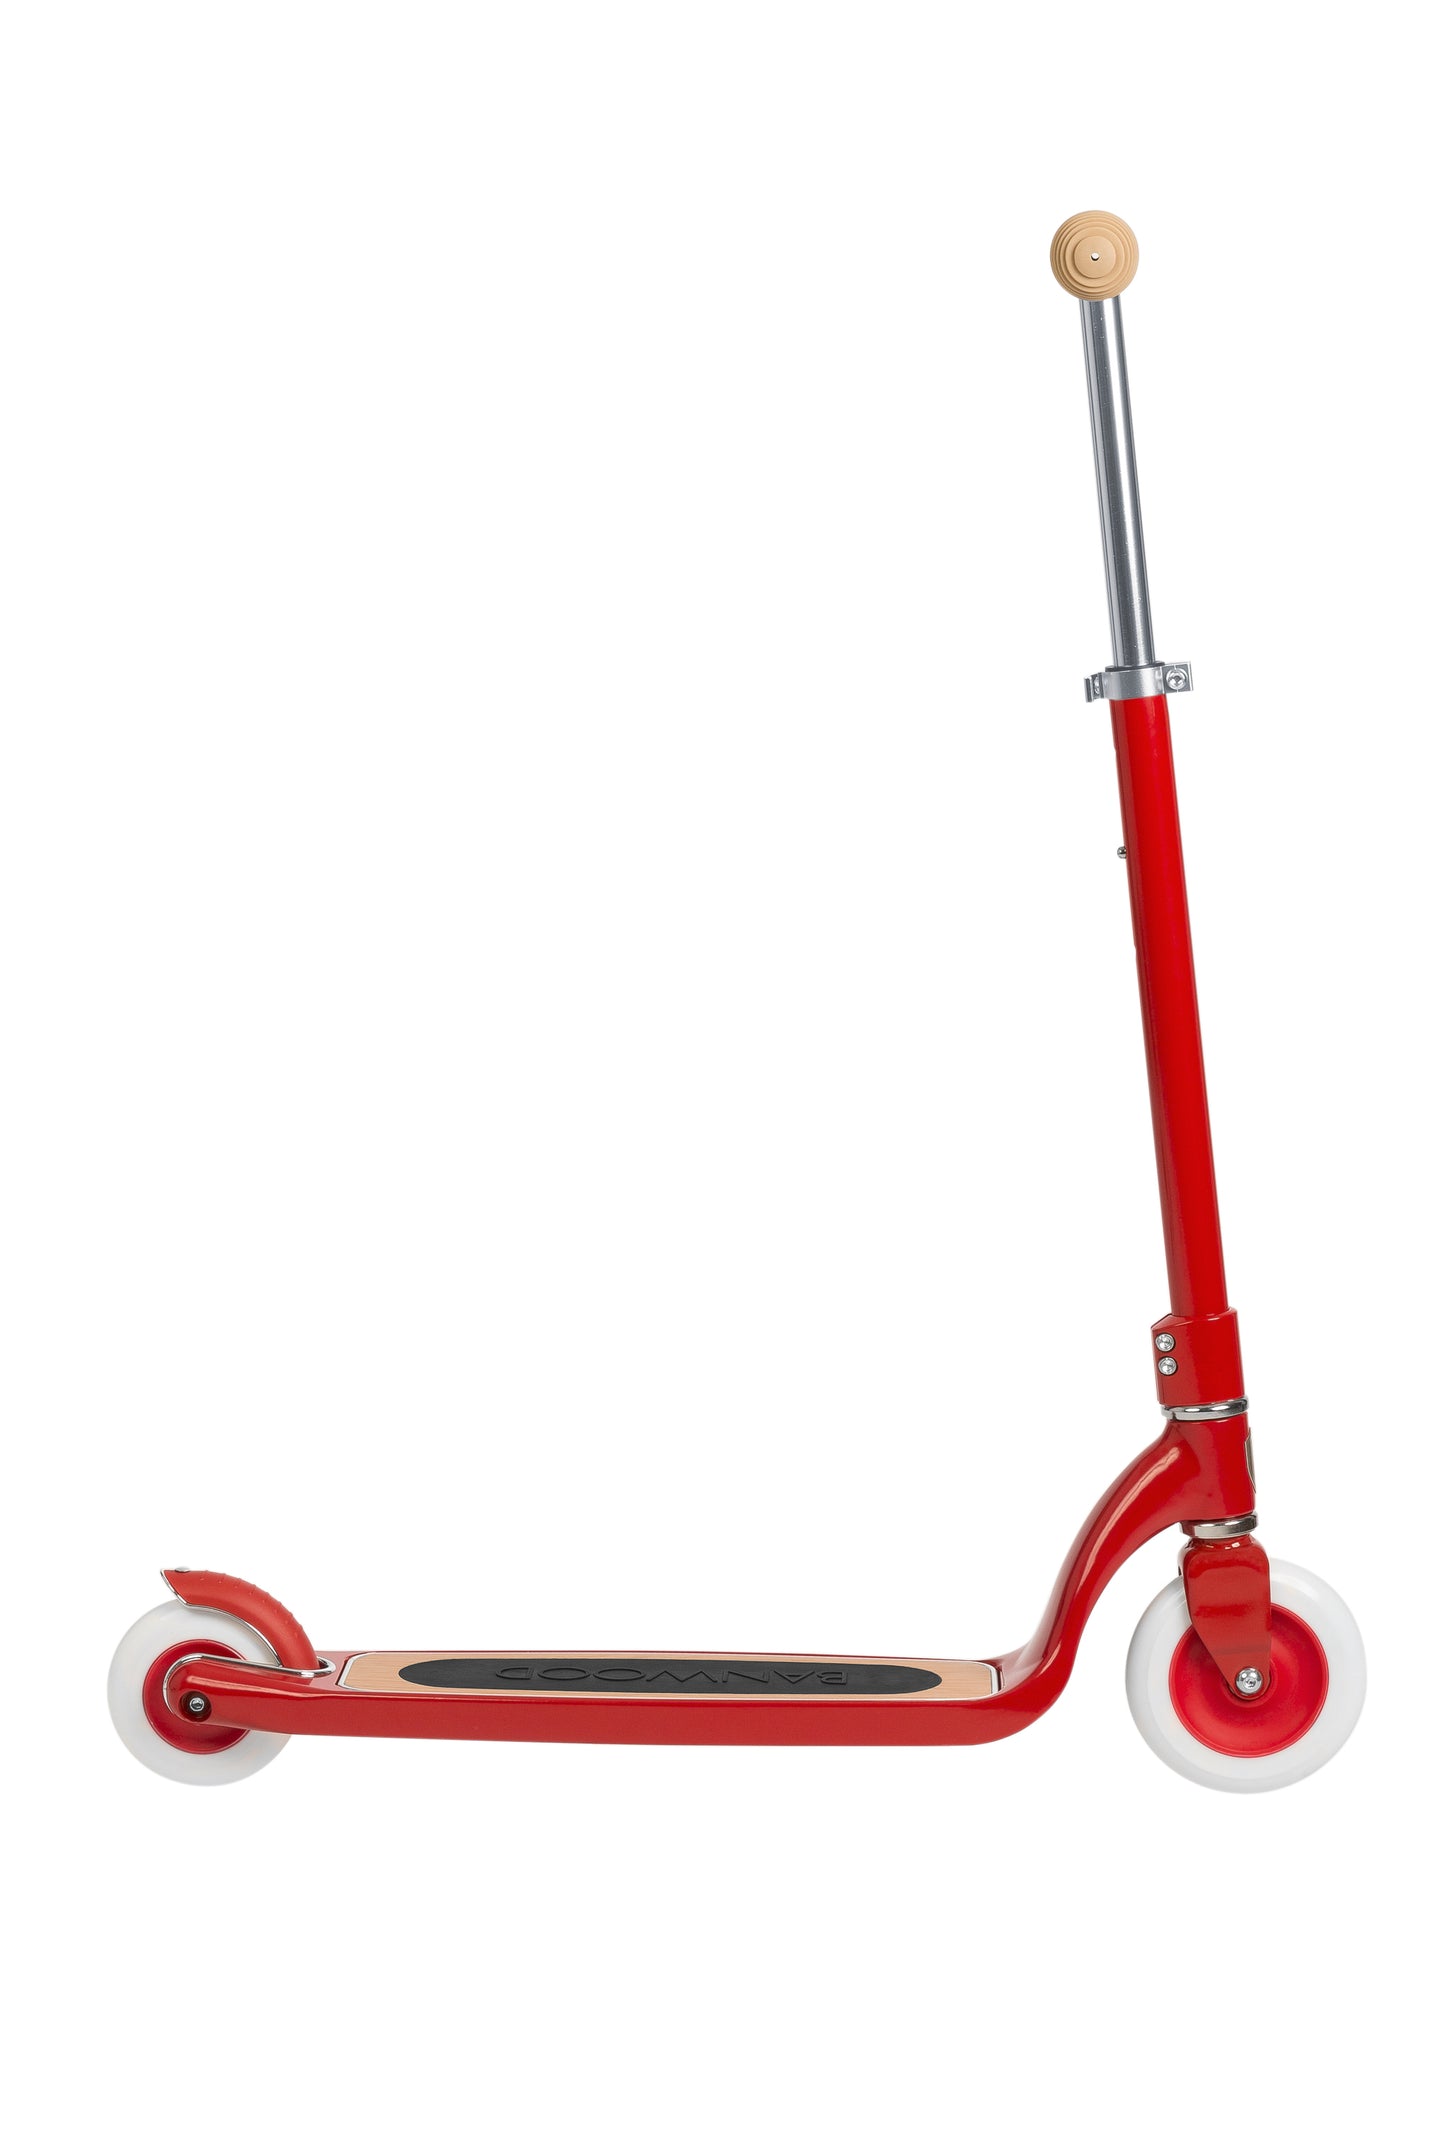 Maxi Scooter - Red - pre-order / back in stock End of February